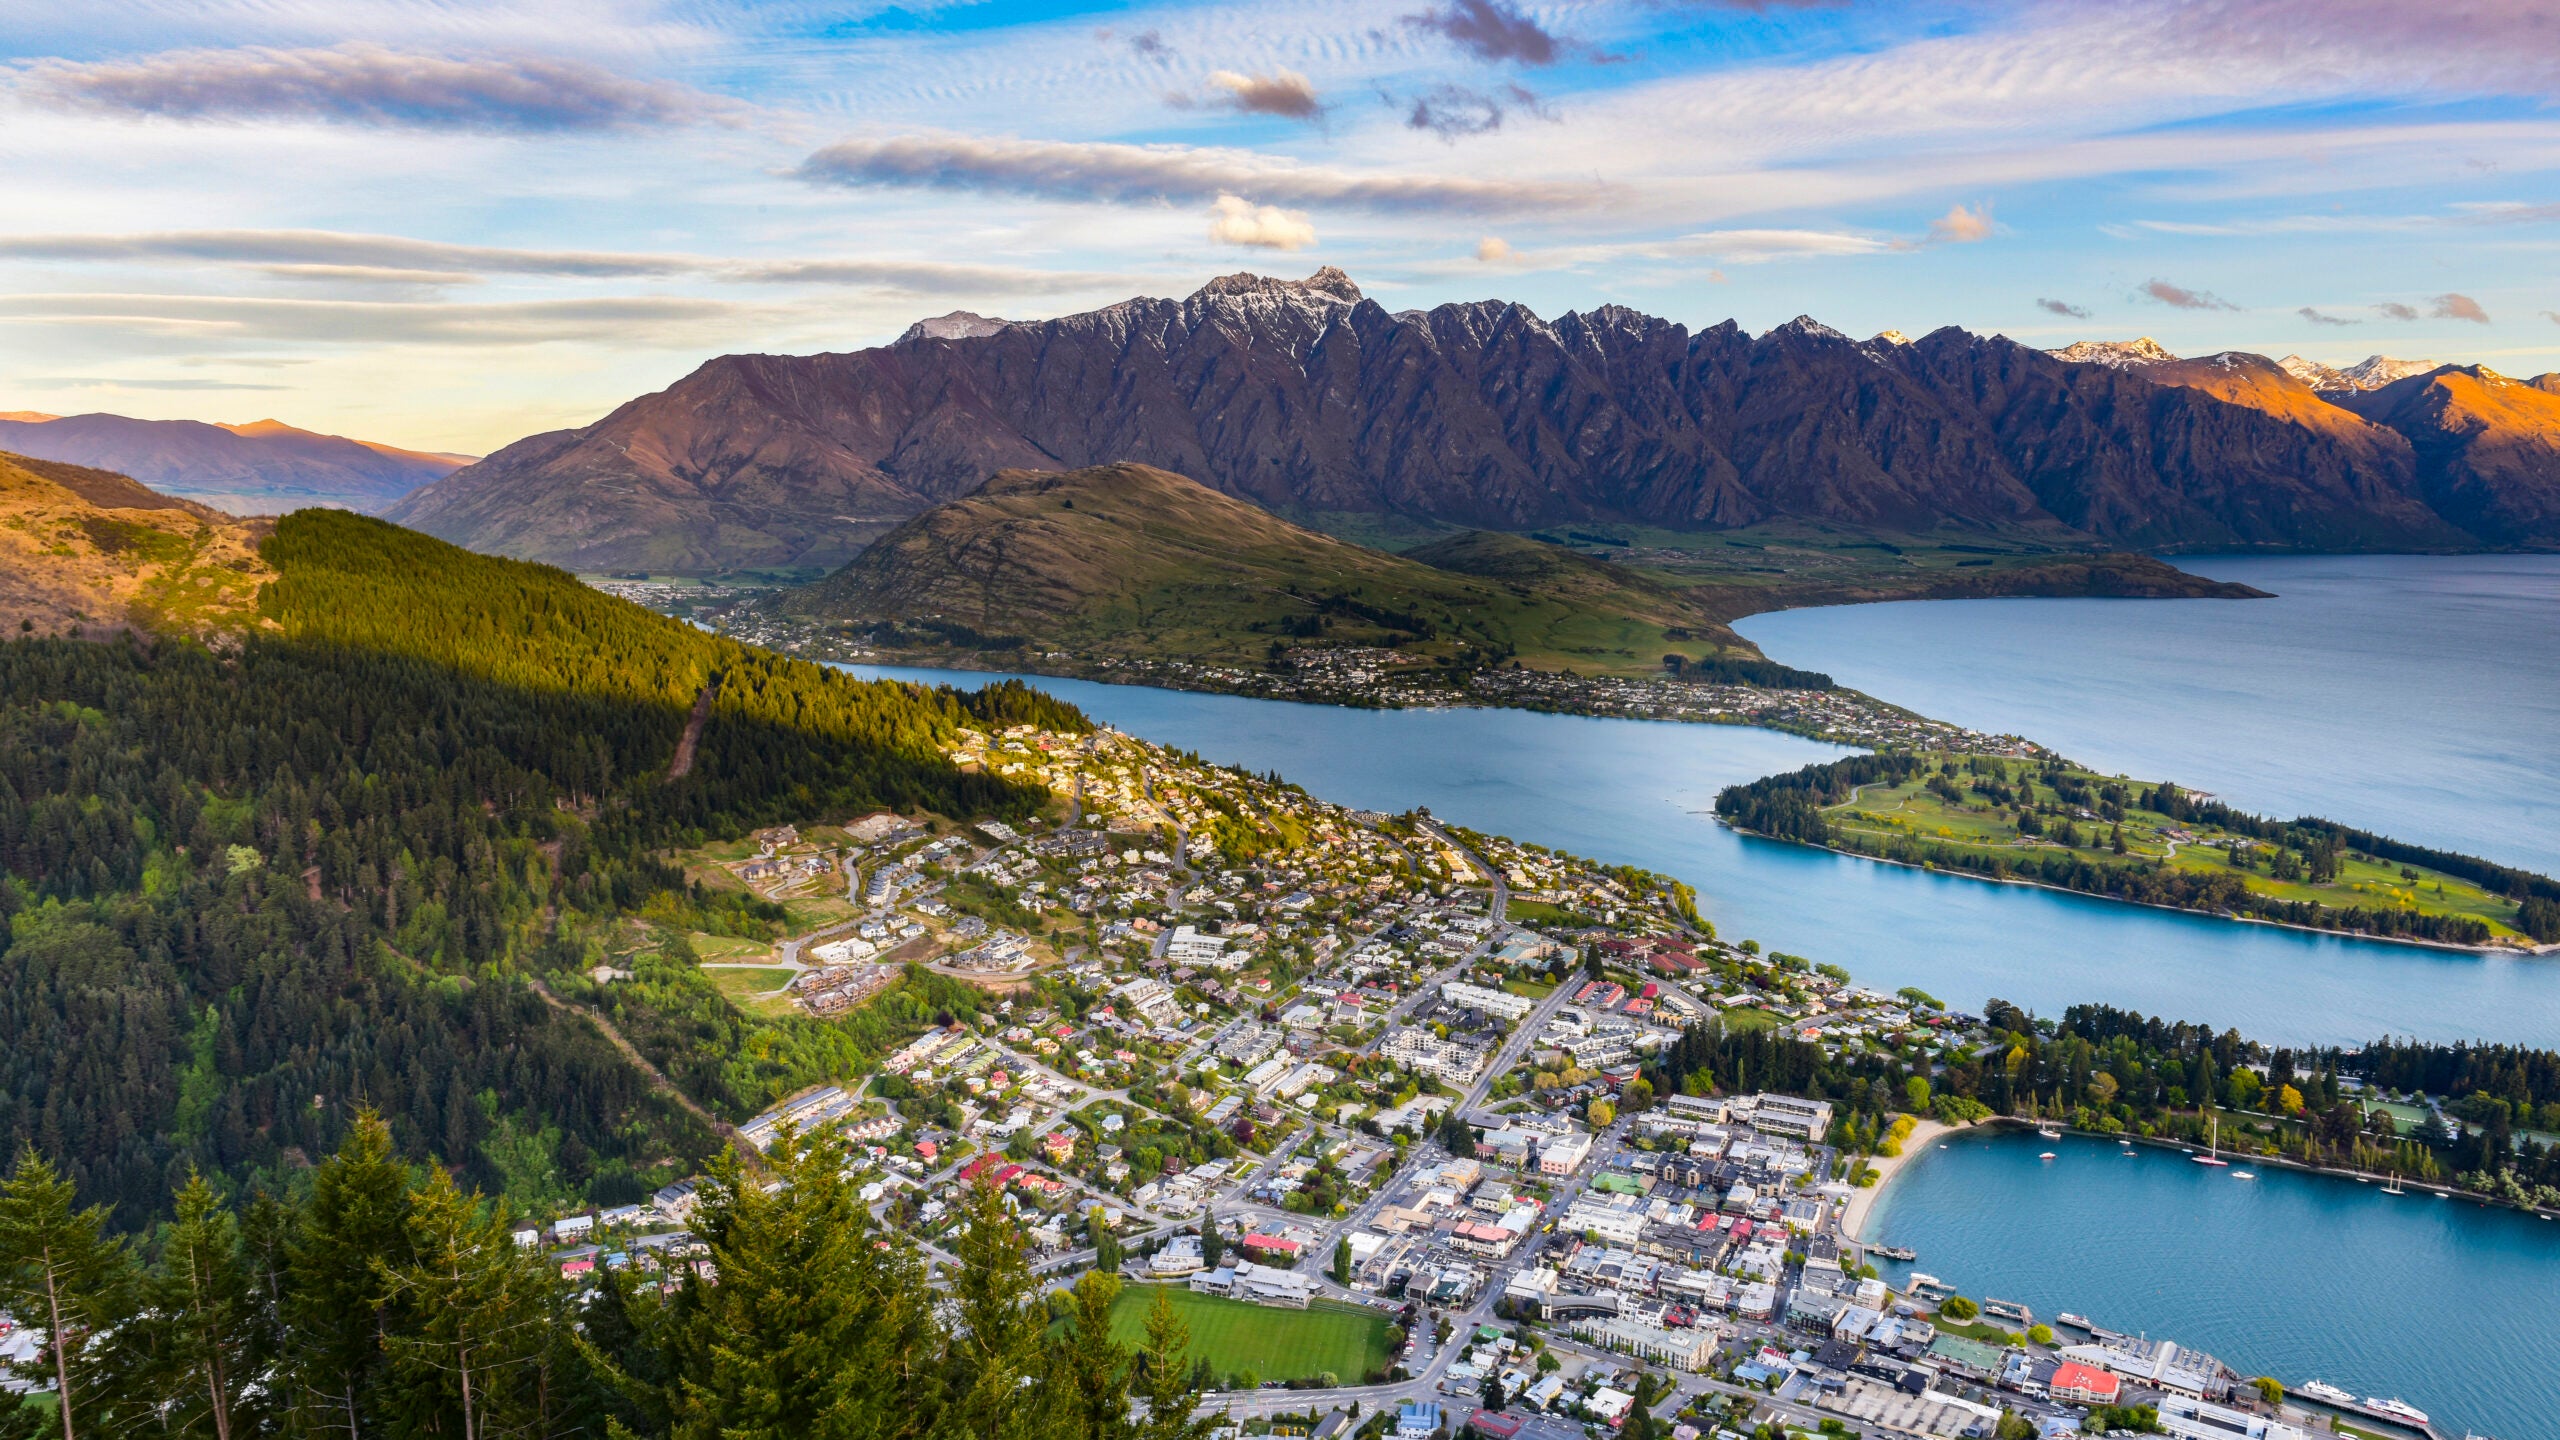 New Zealand has welcomed American tourists for the first time in 2 years – here’s what it’s like to visit